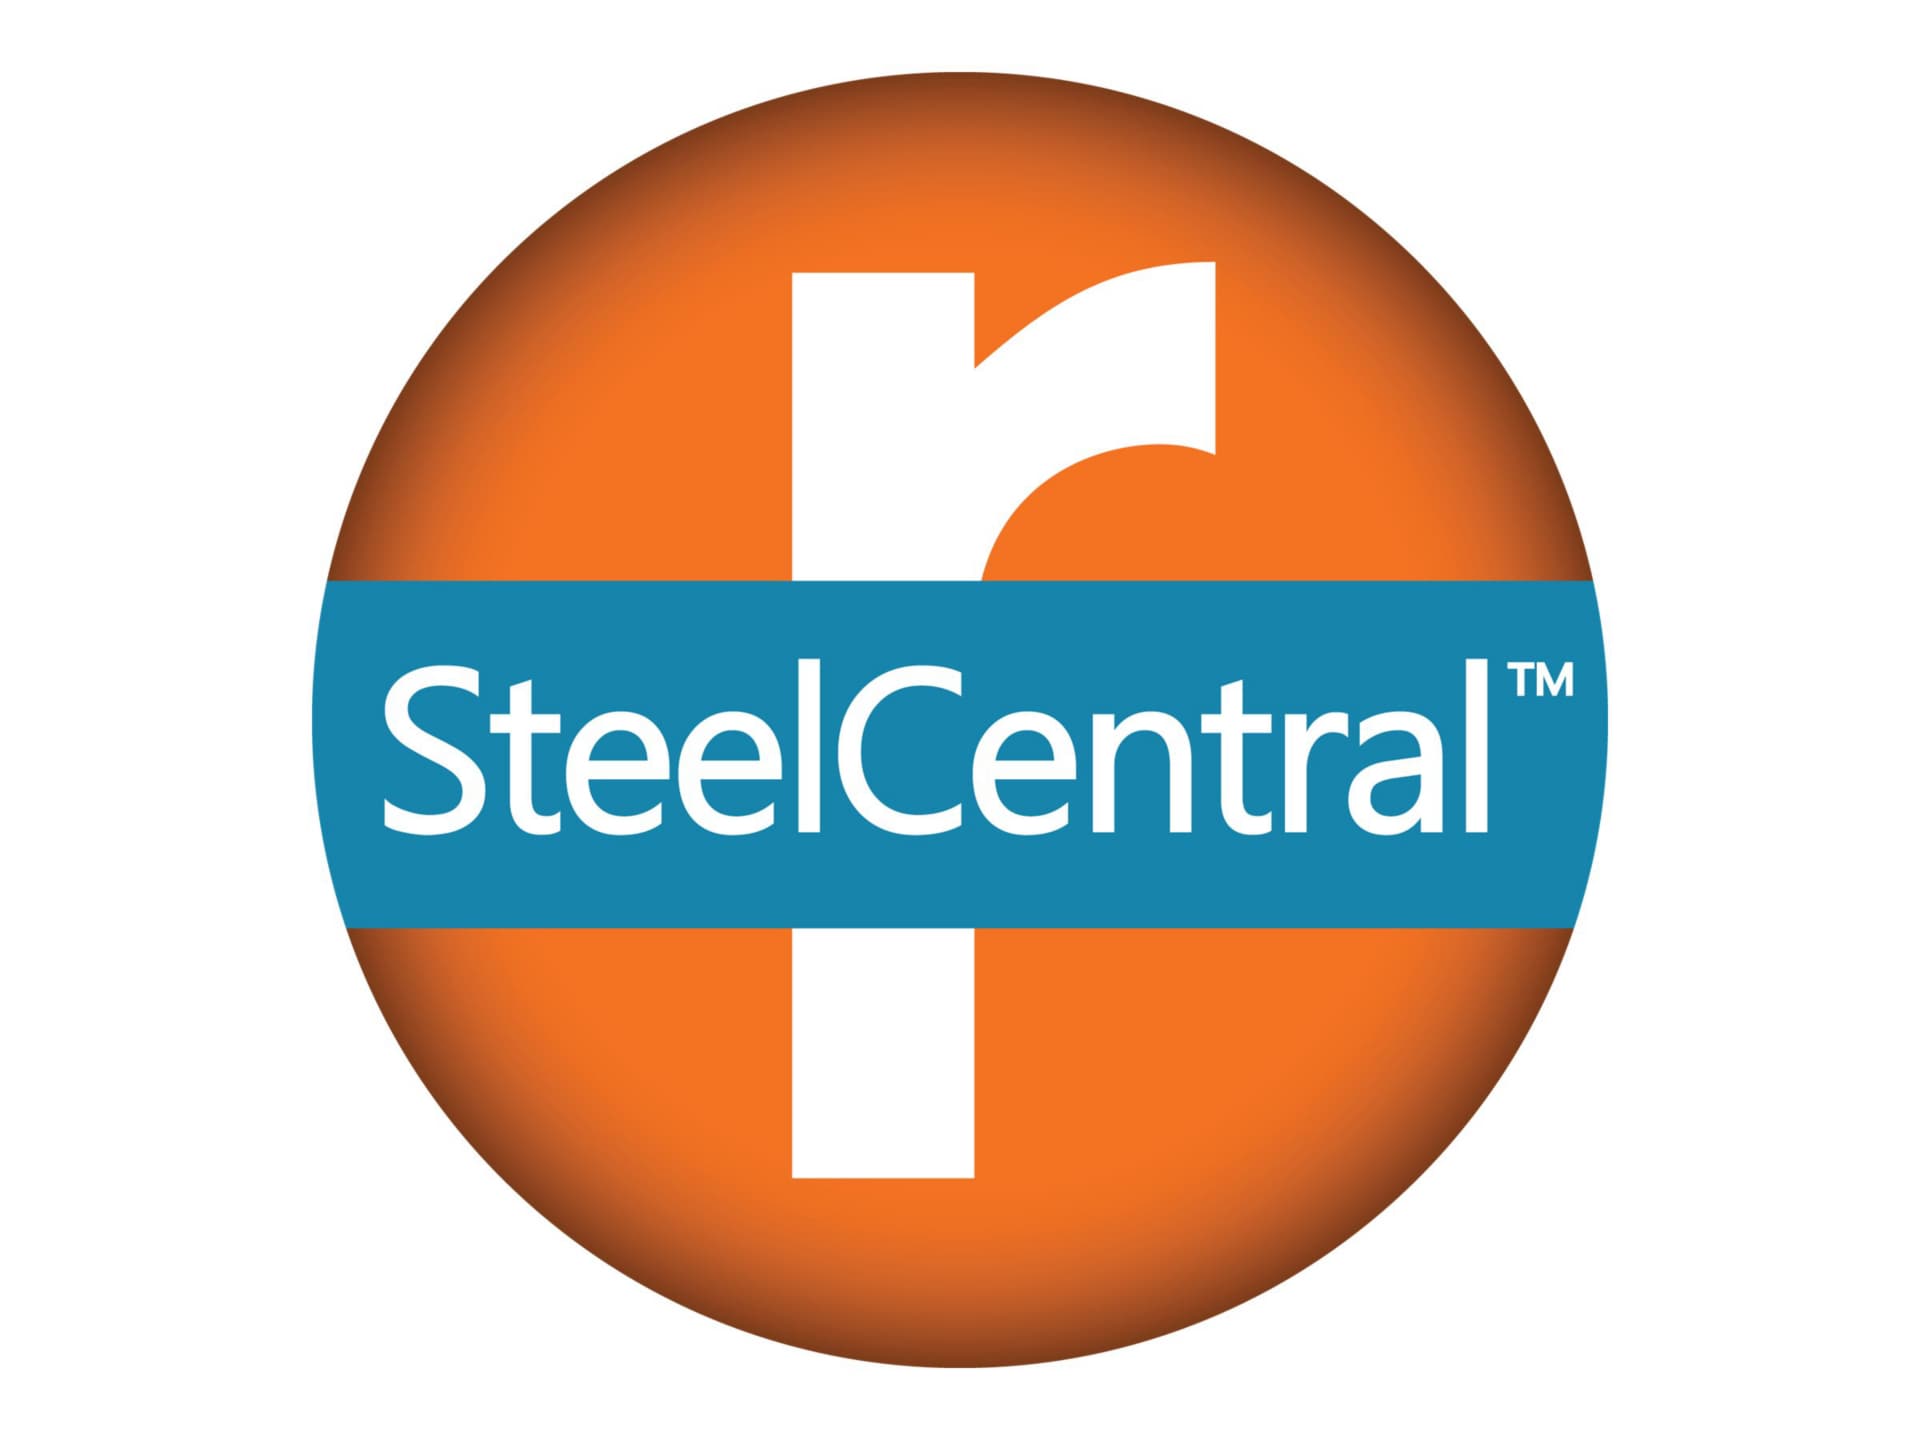 SteelCentral Controller Virtual Edition - license - 1 instance